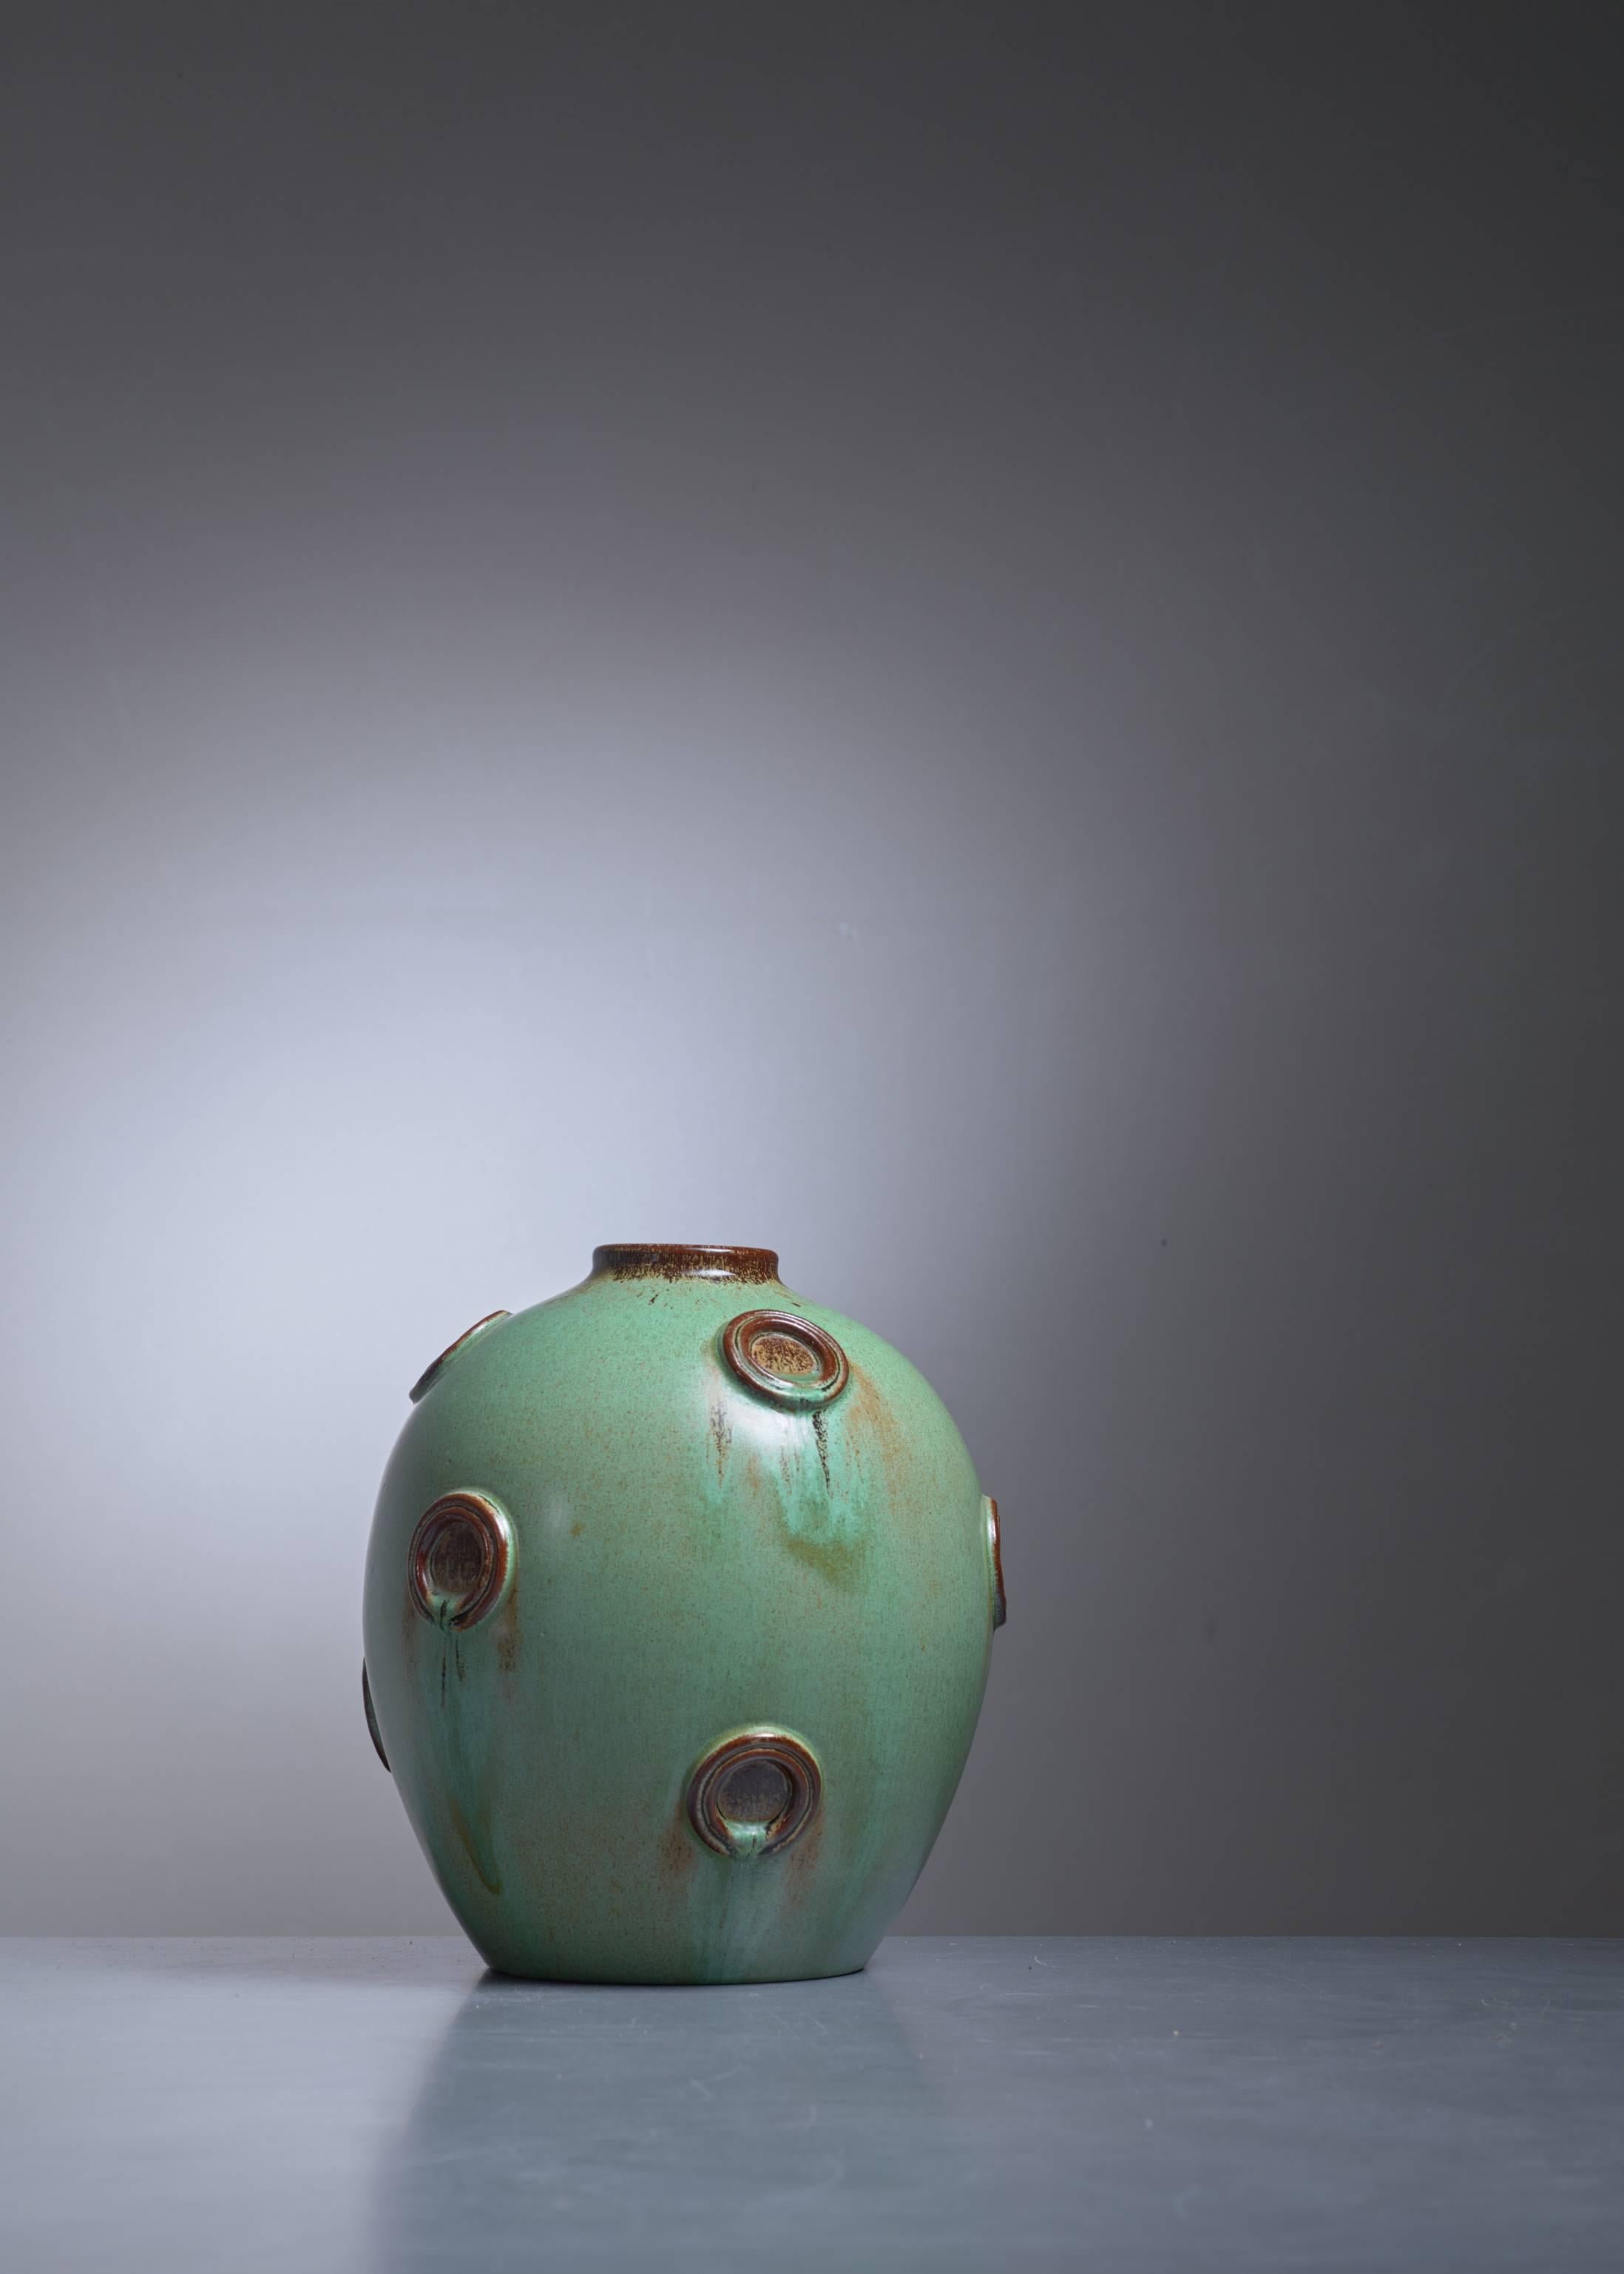 A ceramic vase by Jerk Werkmaster for Nittsjo¨ keramikfabrik. The vase has a green and brown glazing.
In a very good condition with a faded signature underneath.

Jerk Werkmaster (1896-1978) was a Swedish artist. He was creative director at Nittsjo¨